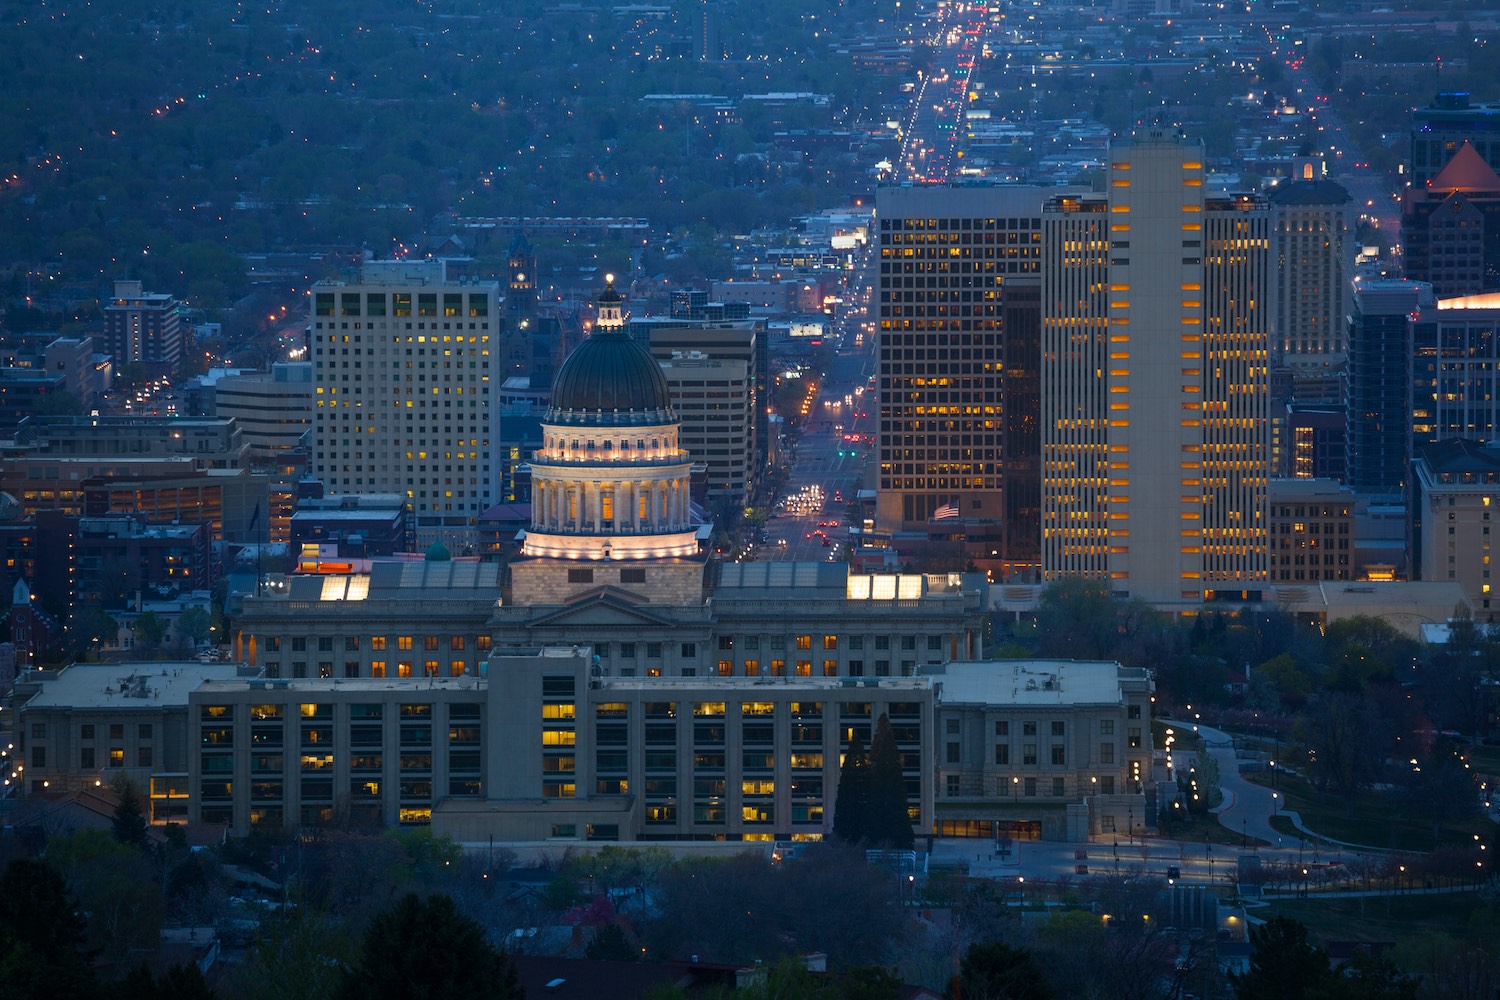 View of Utah Capitol building during night time